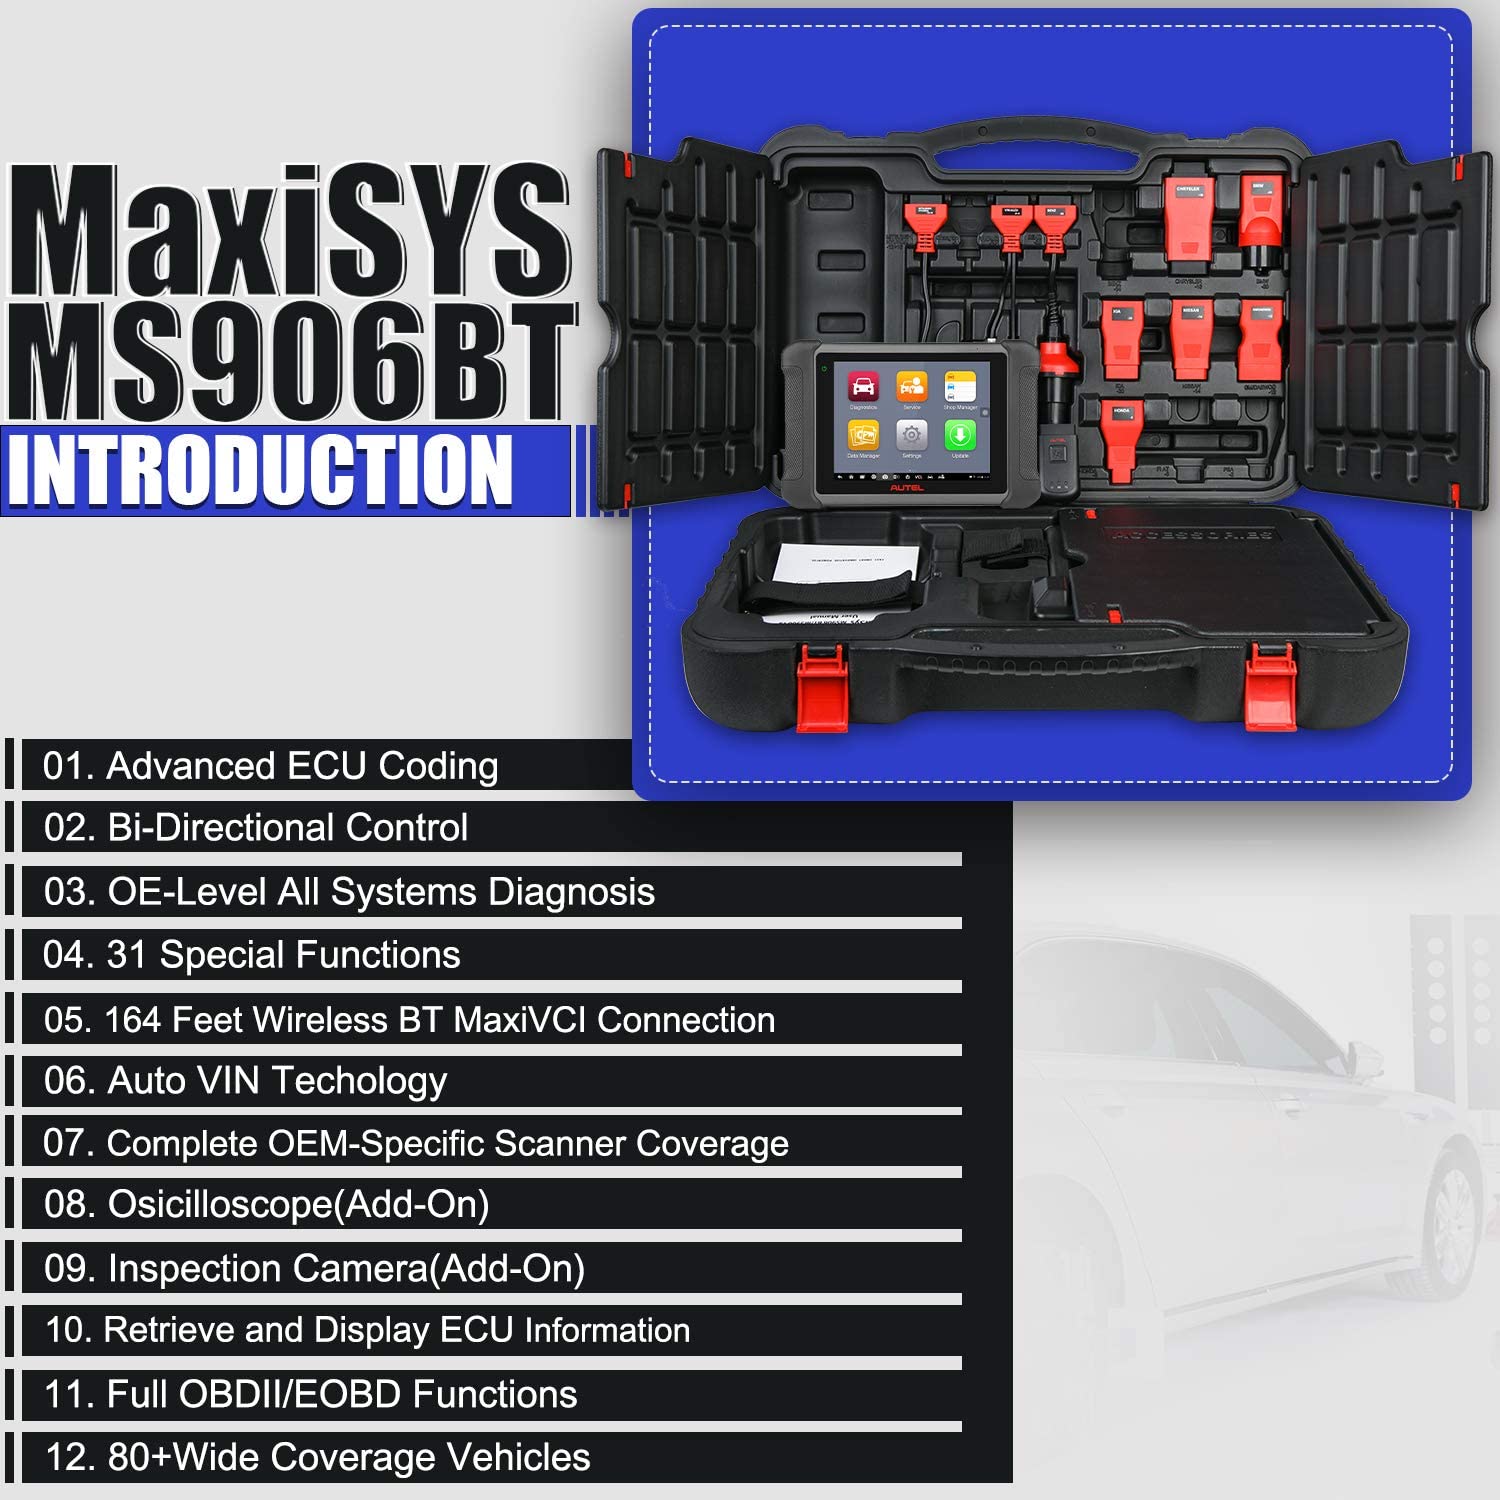 Autel MaxiSys MS906BT Automotive Scan Tool Diagnostic Scanner Advanced ECU Coding Full Bi-Directional Control All Systems Diagnosis